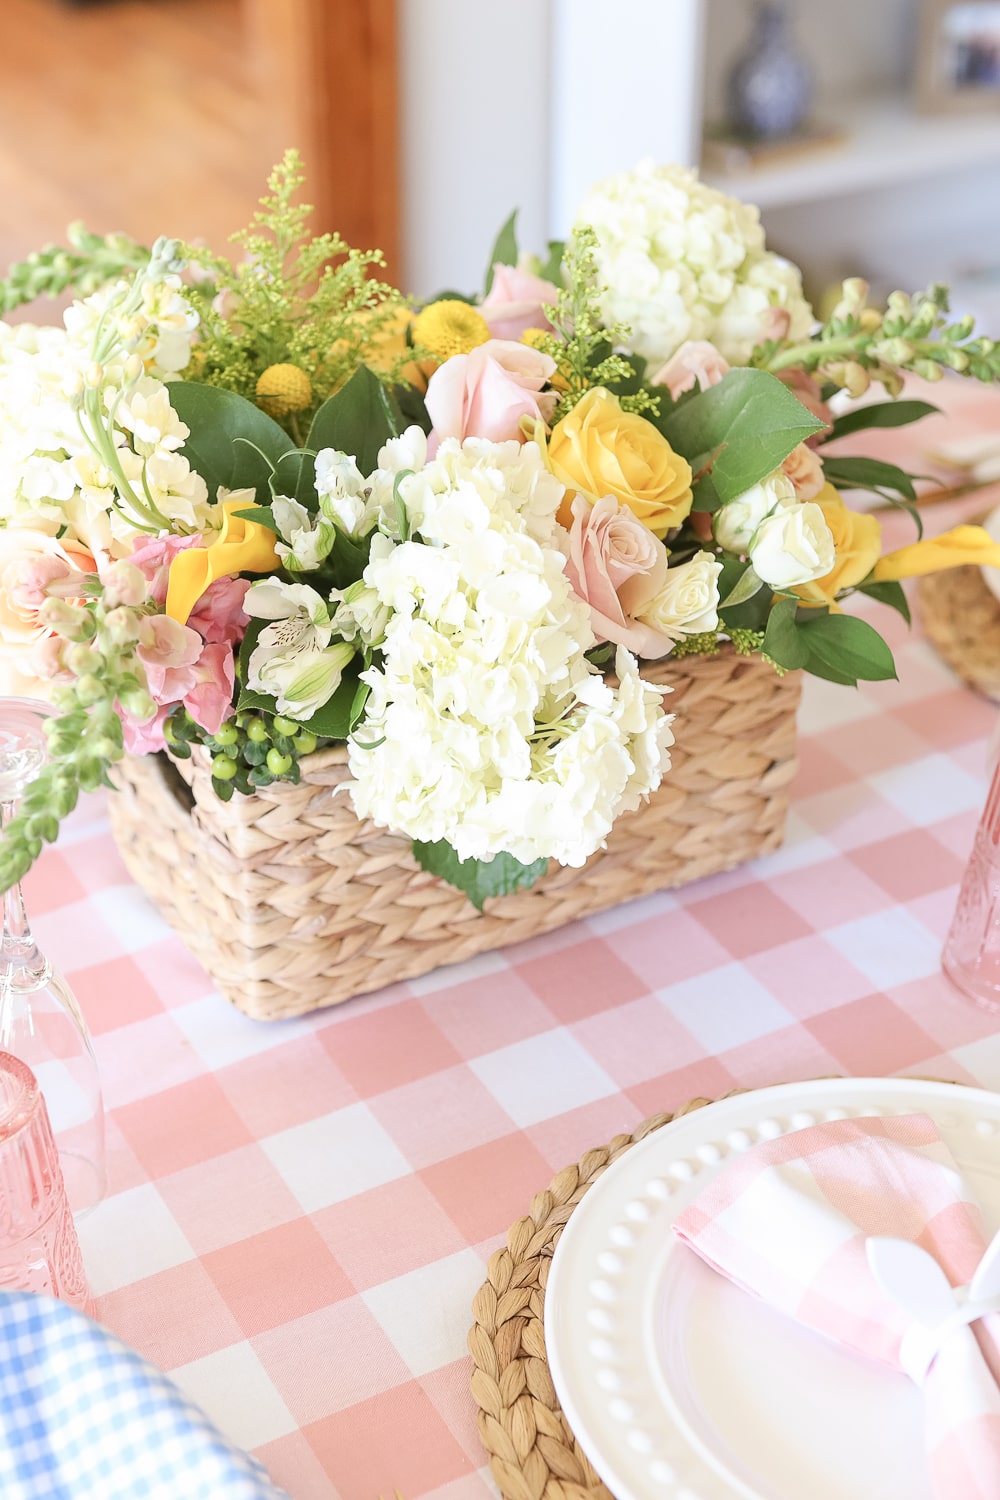 Low Easter centerpiece ideas from blogger Stephanie Ziajka on Diary of a Debutante